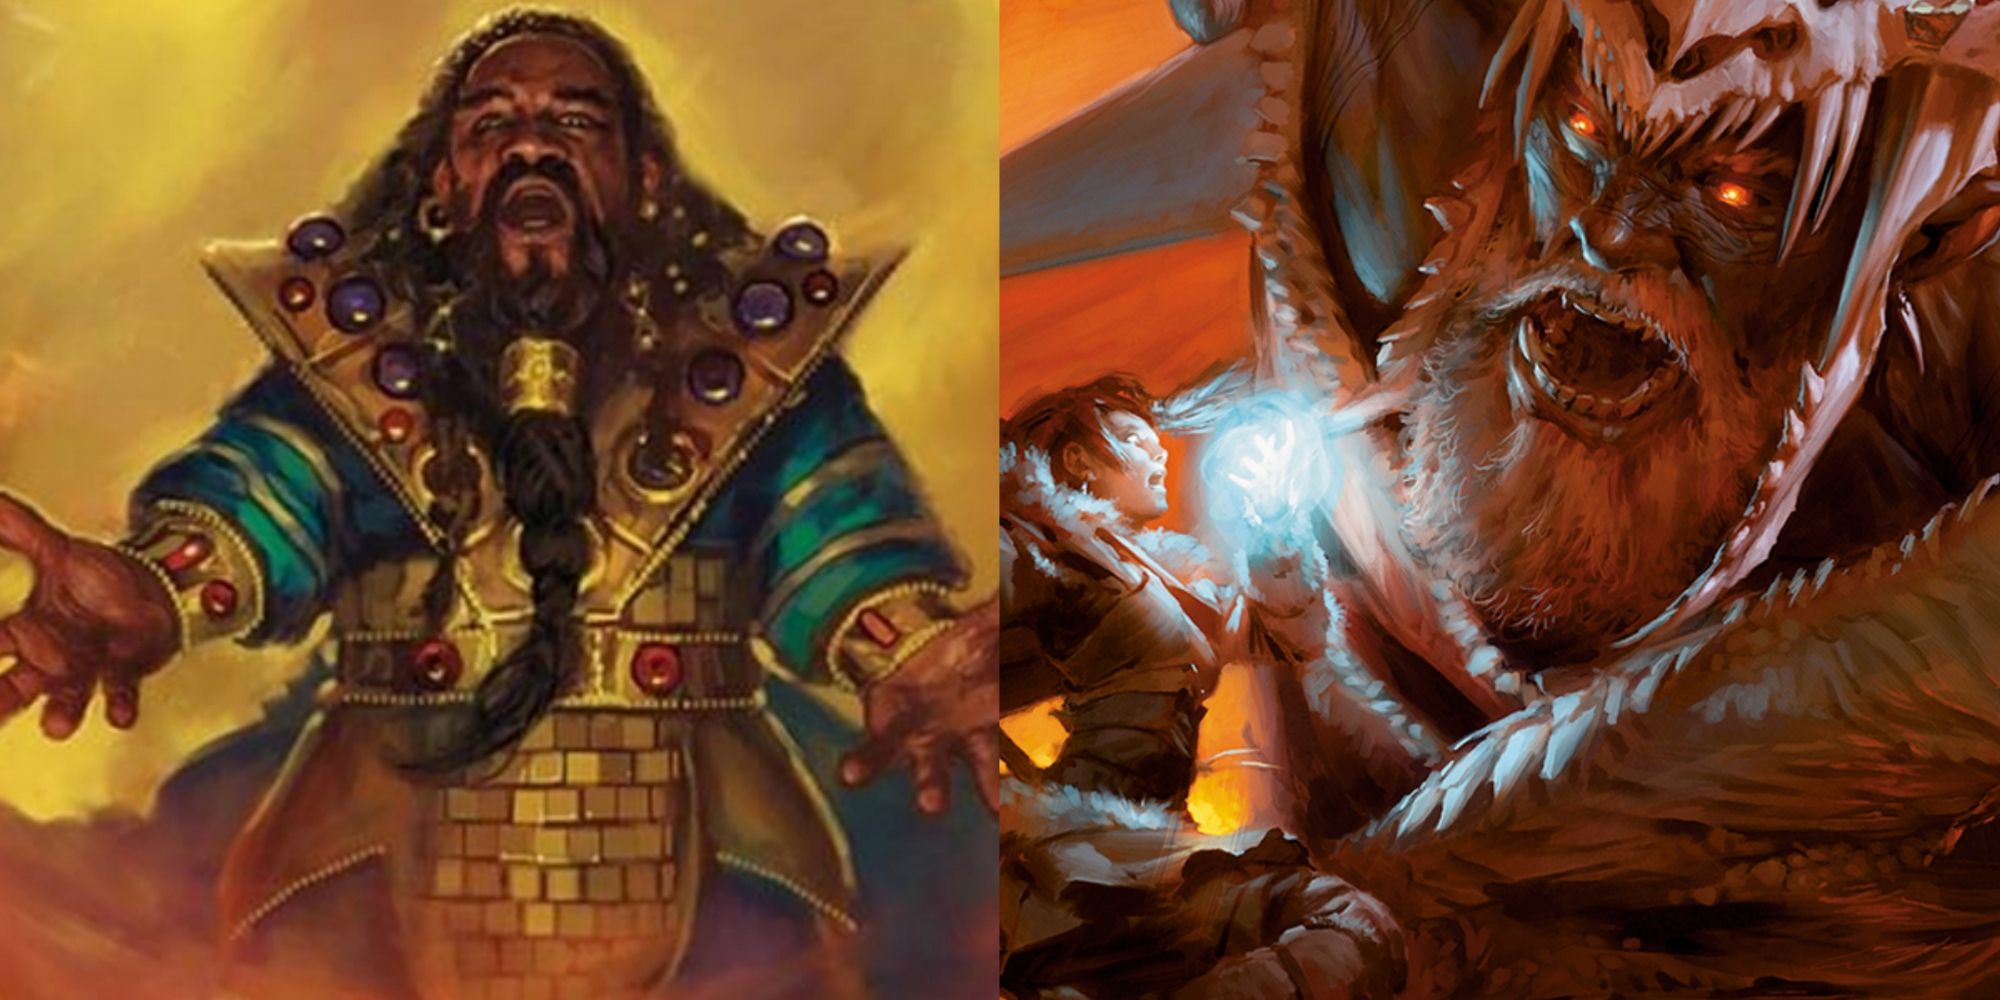 Two images of spellcasters, one surrounded in flames and one about to fight a giant monster